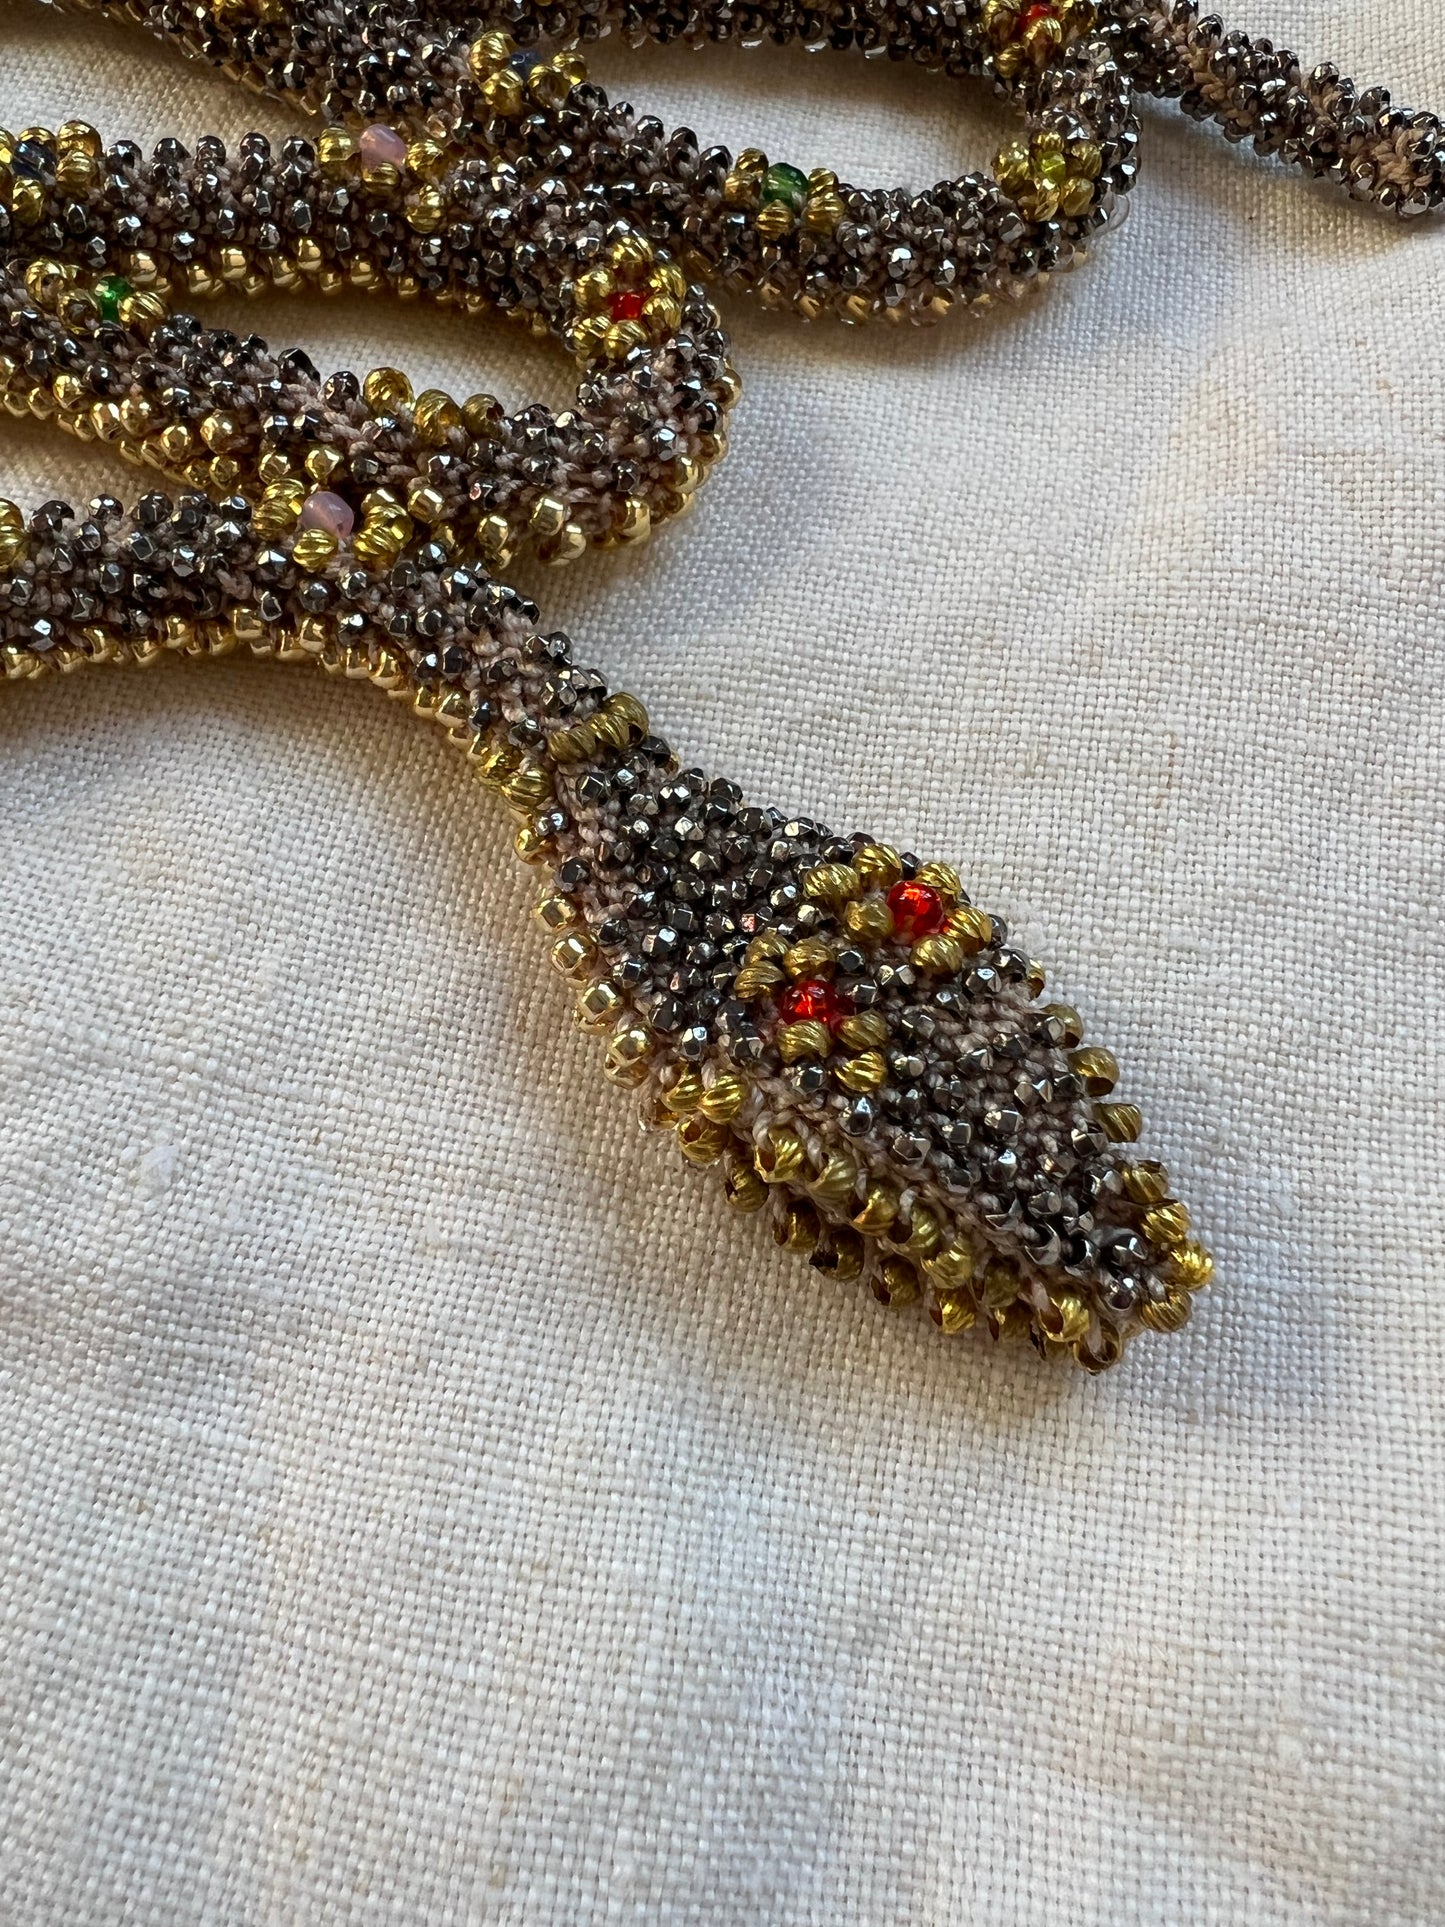 Bead Crochet Snake Necklace | Antique Steel Cut, Torse and Glass Beads